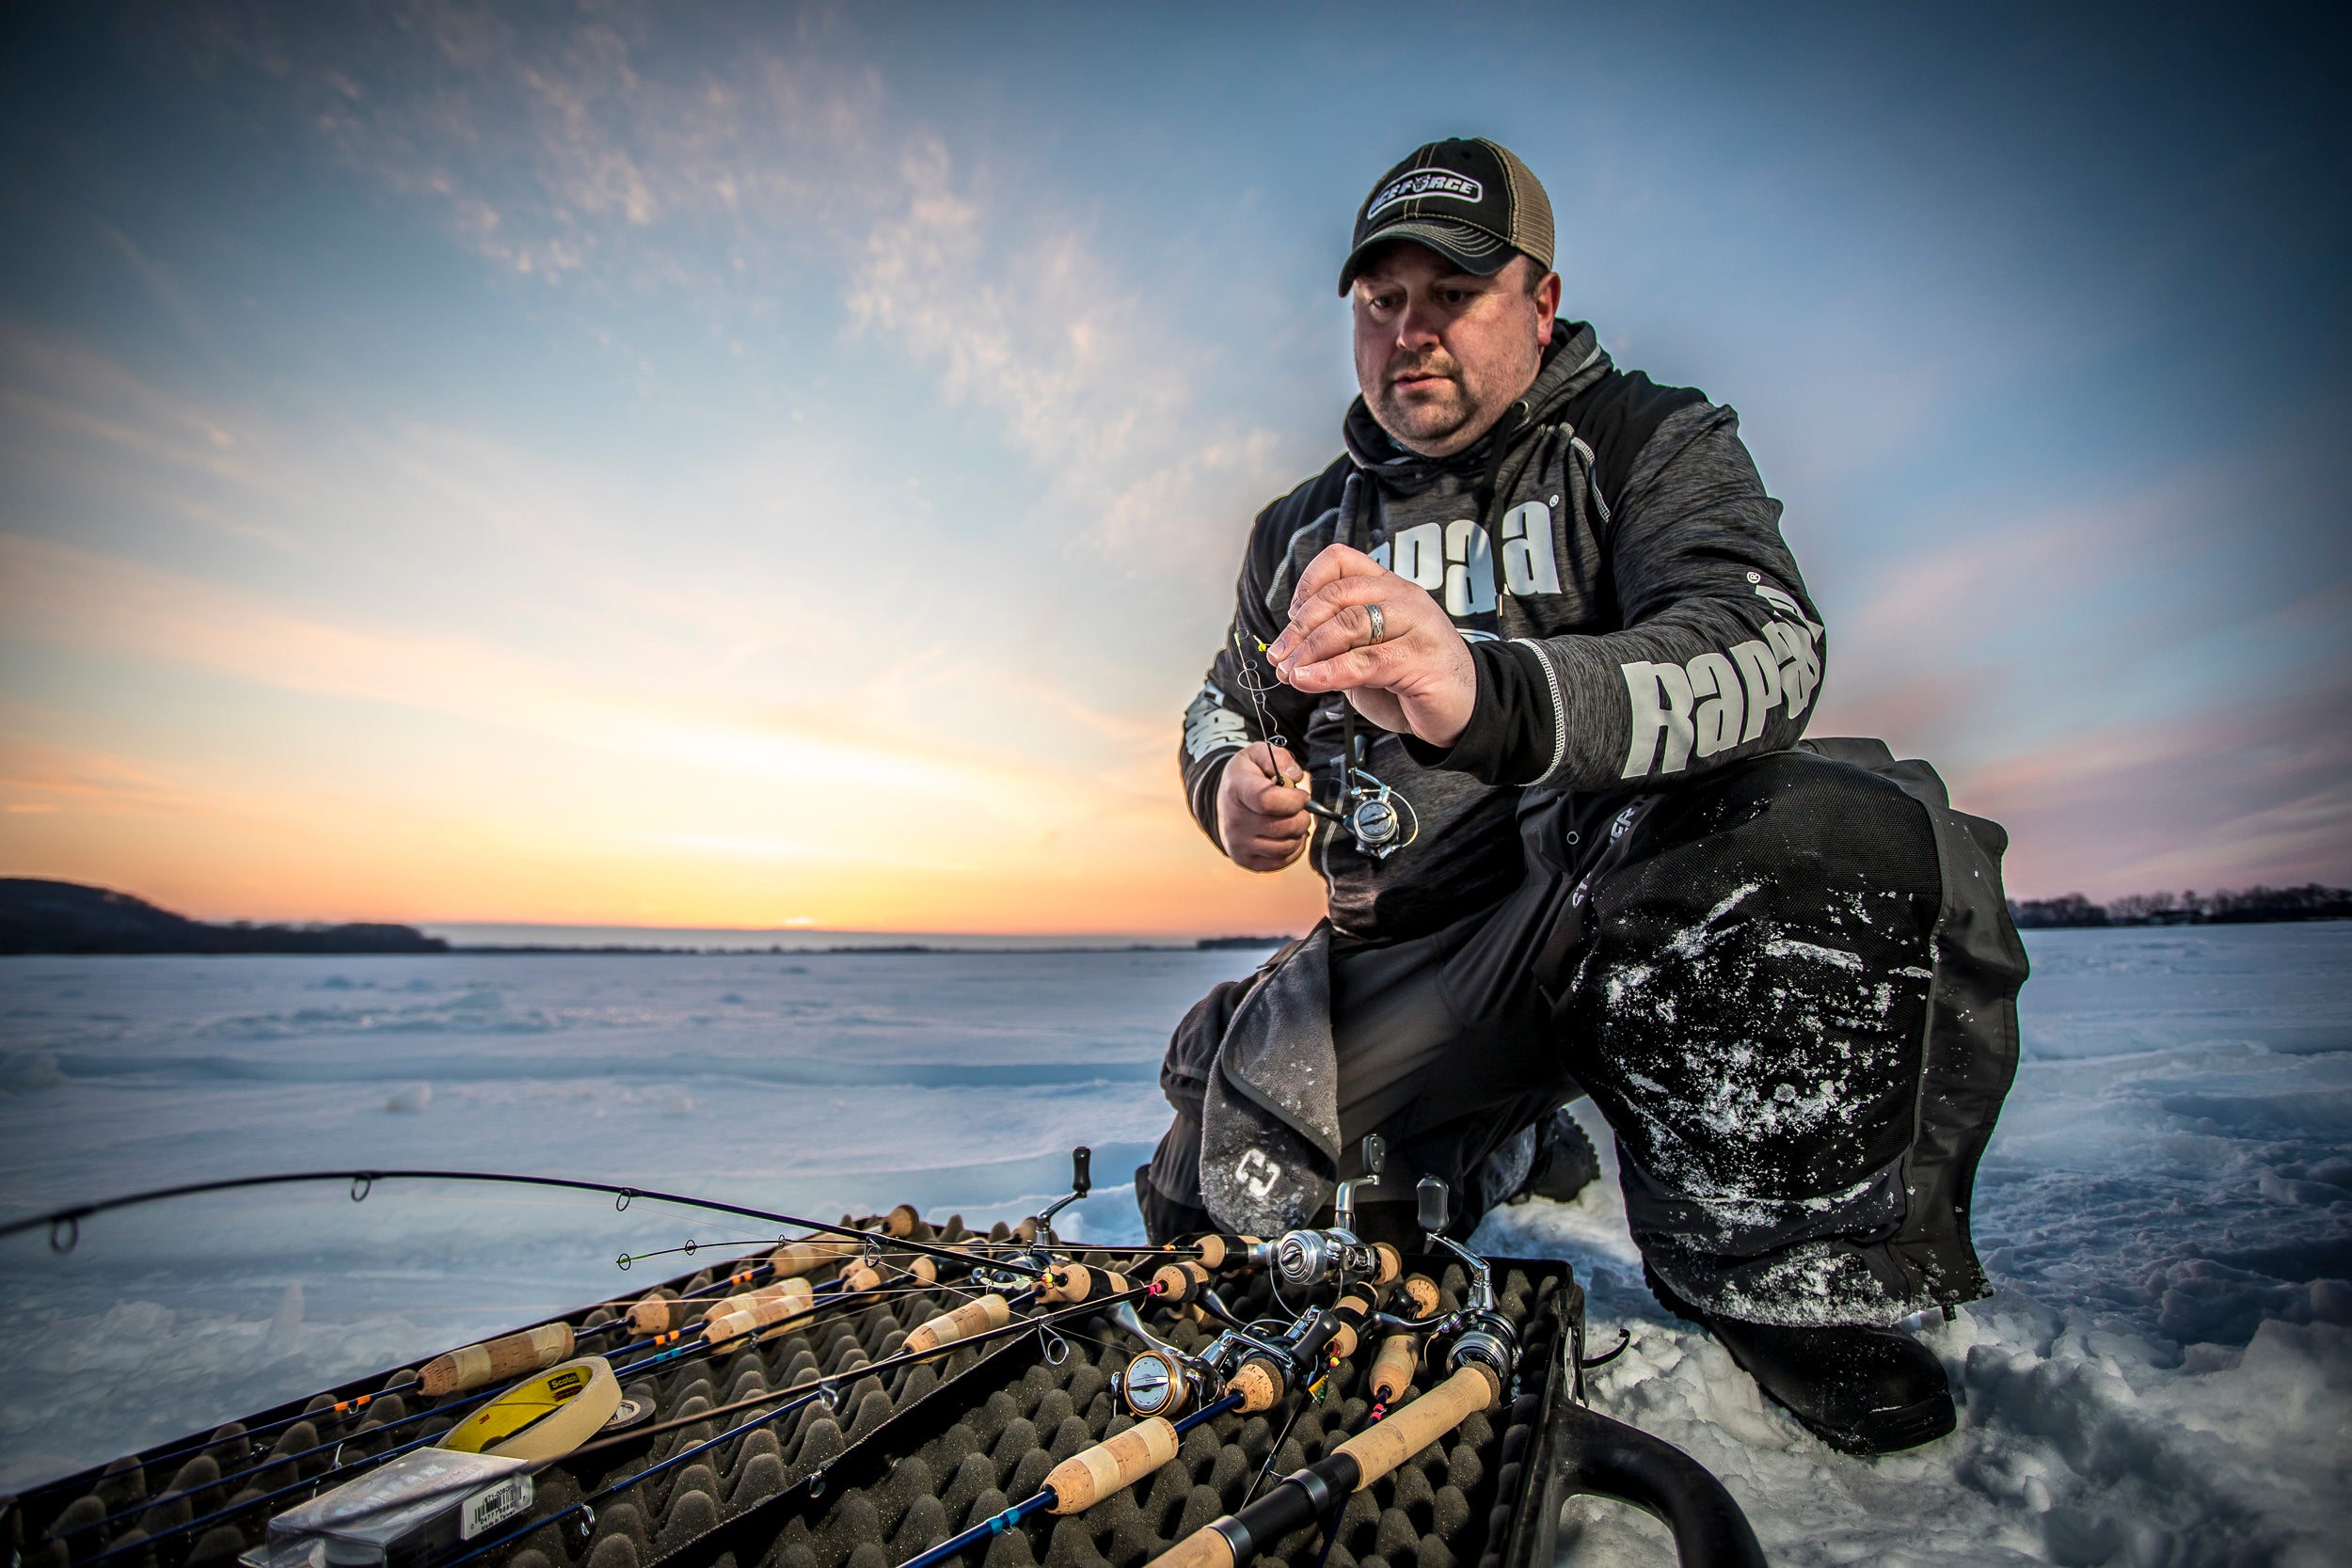 The Best Rods on Ice - St. Croix Rod